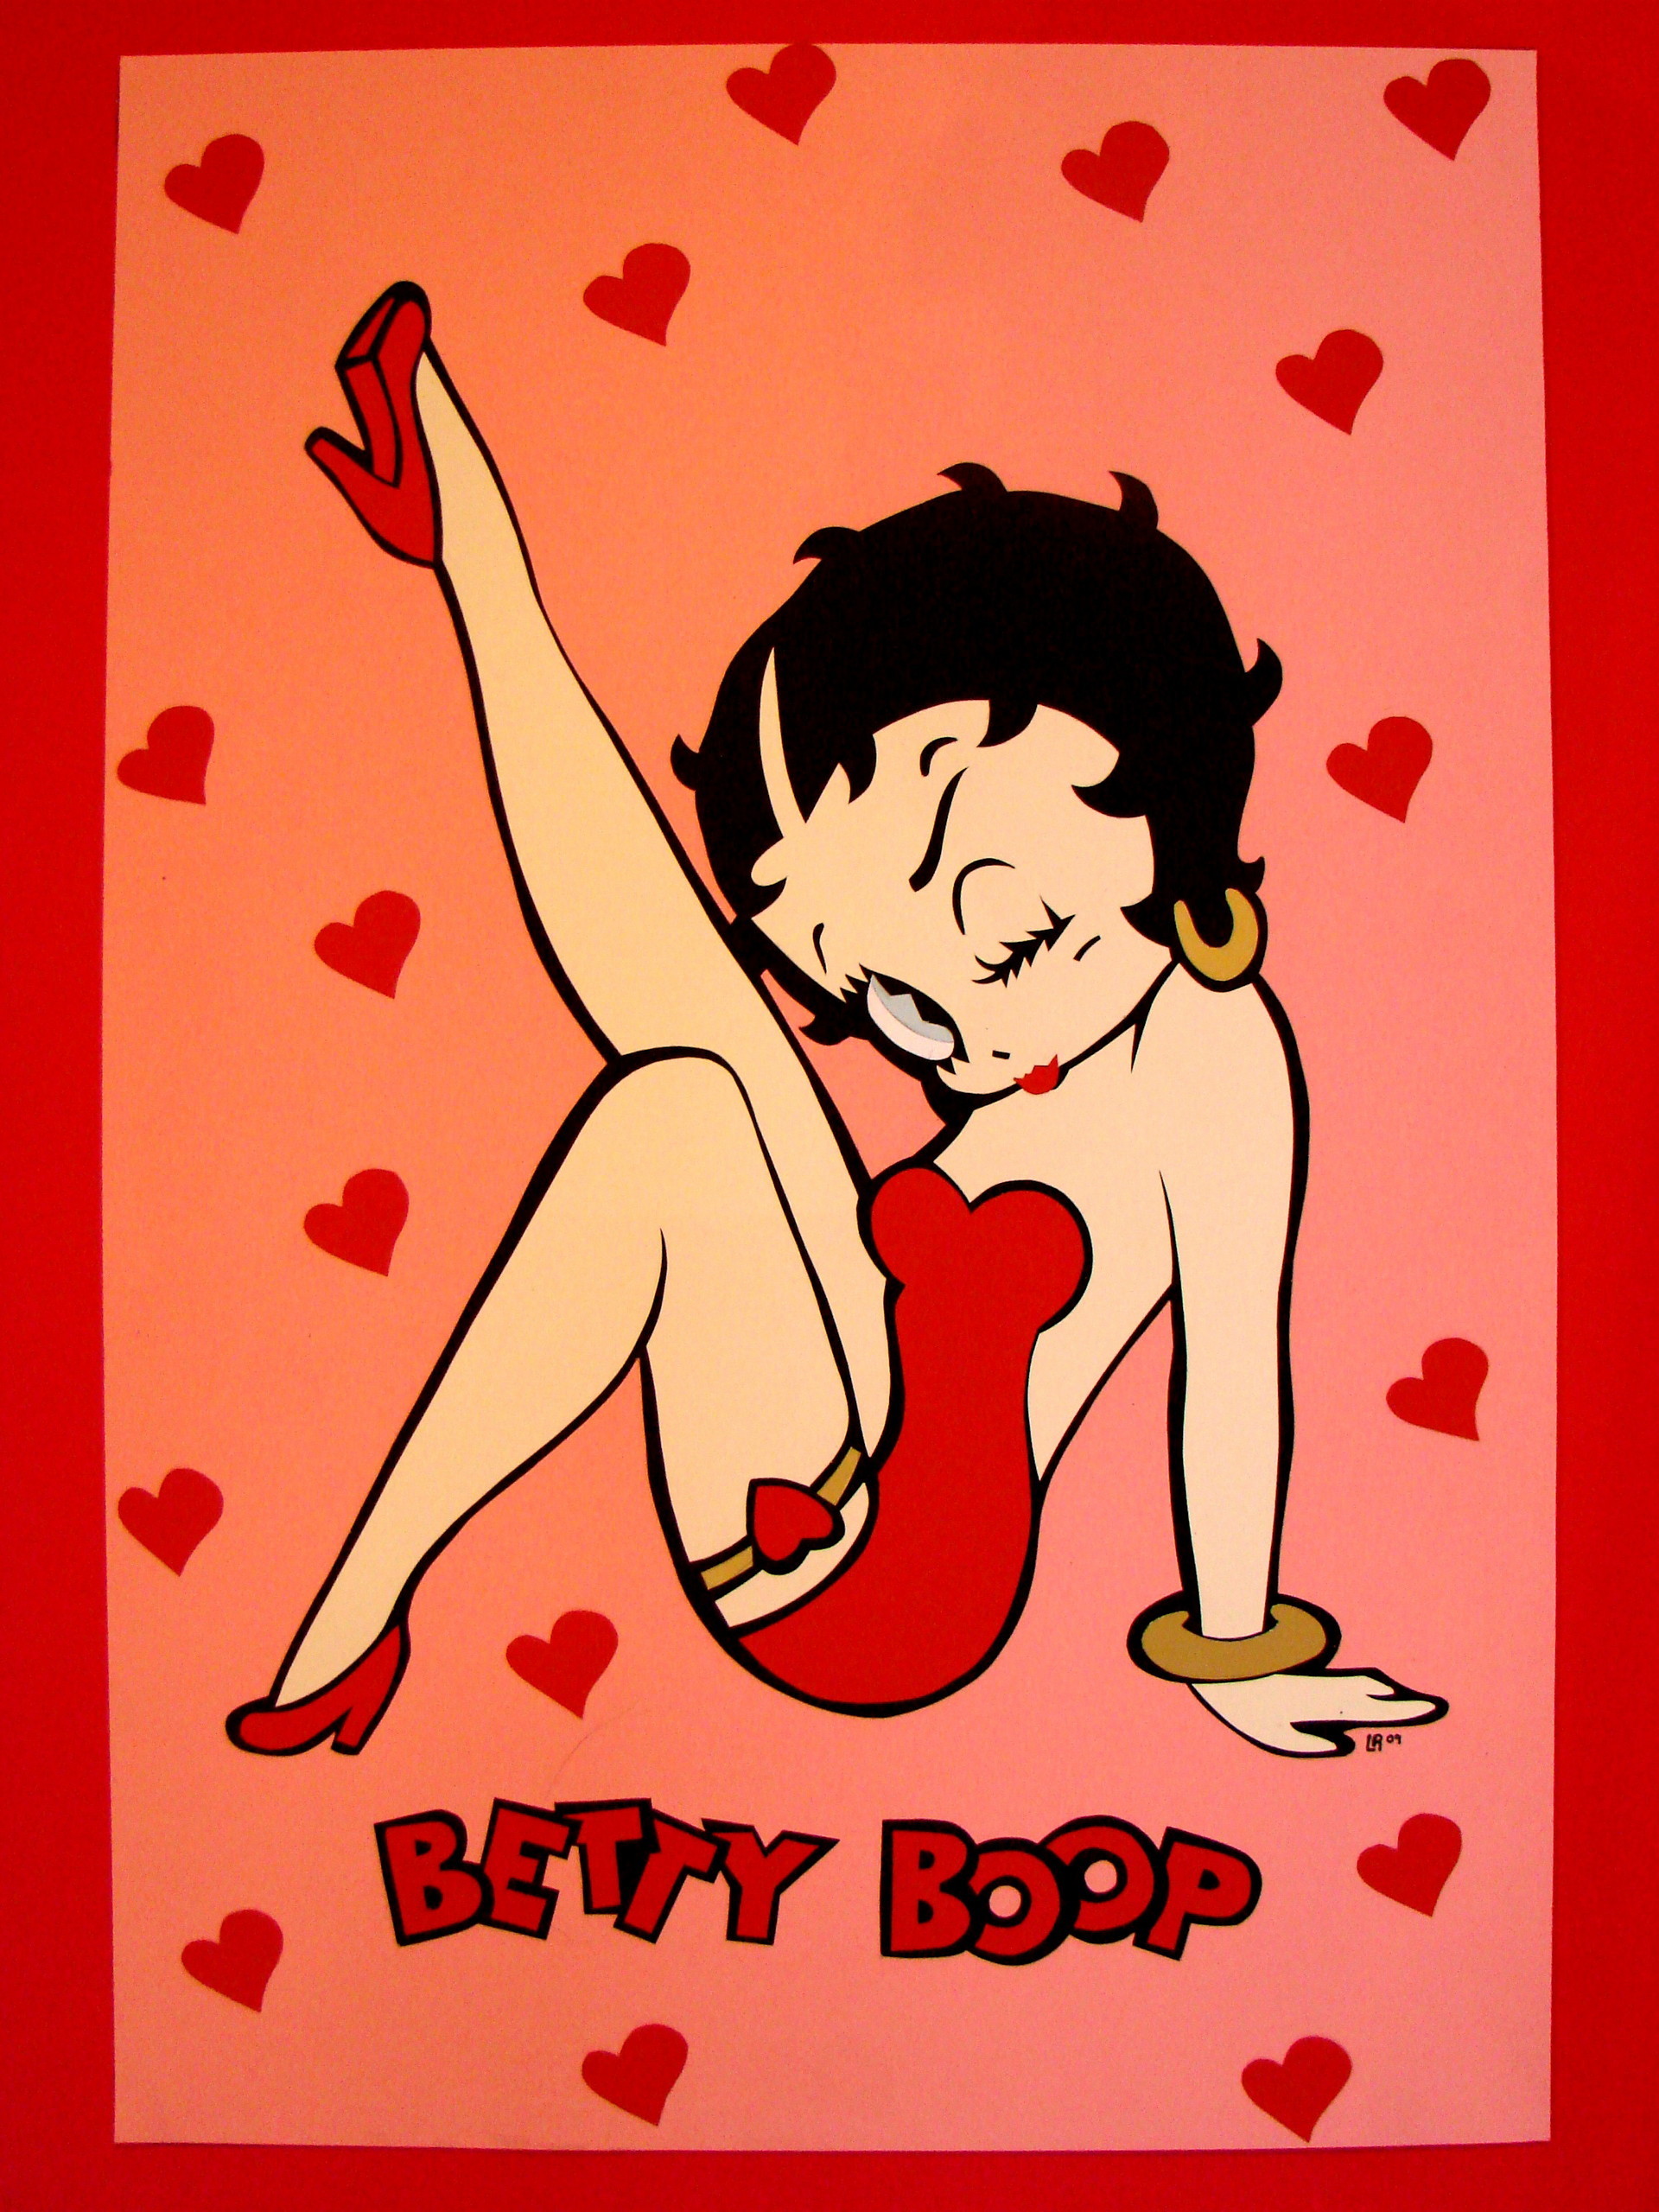 Betty Boop Wallpaper For Phone Image